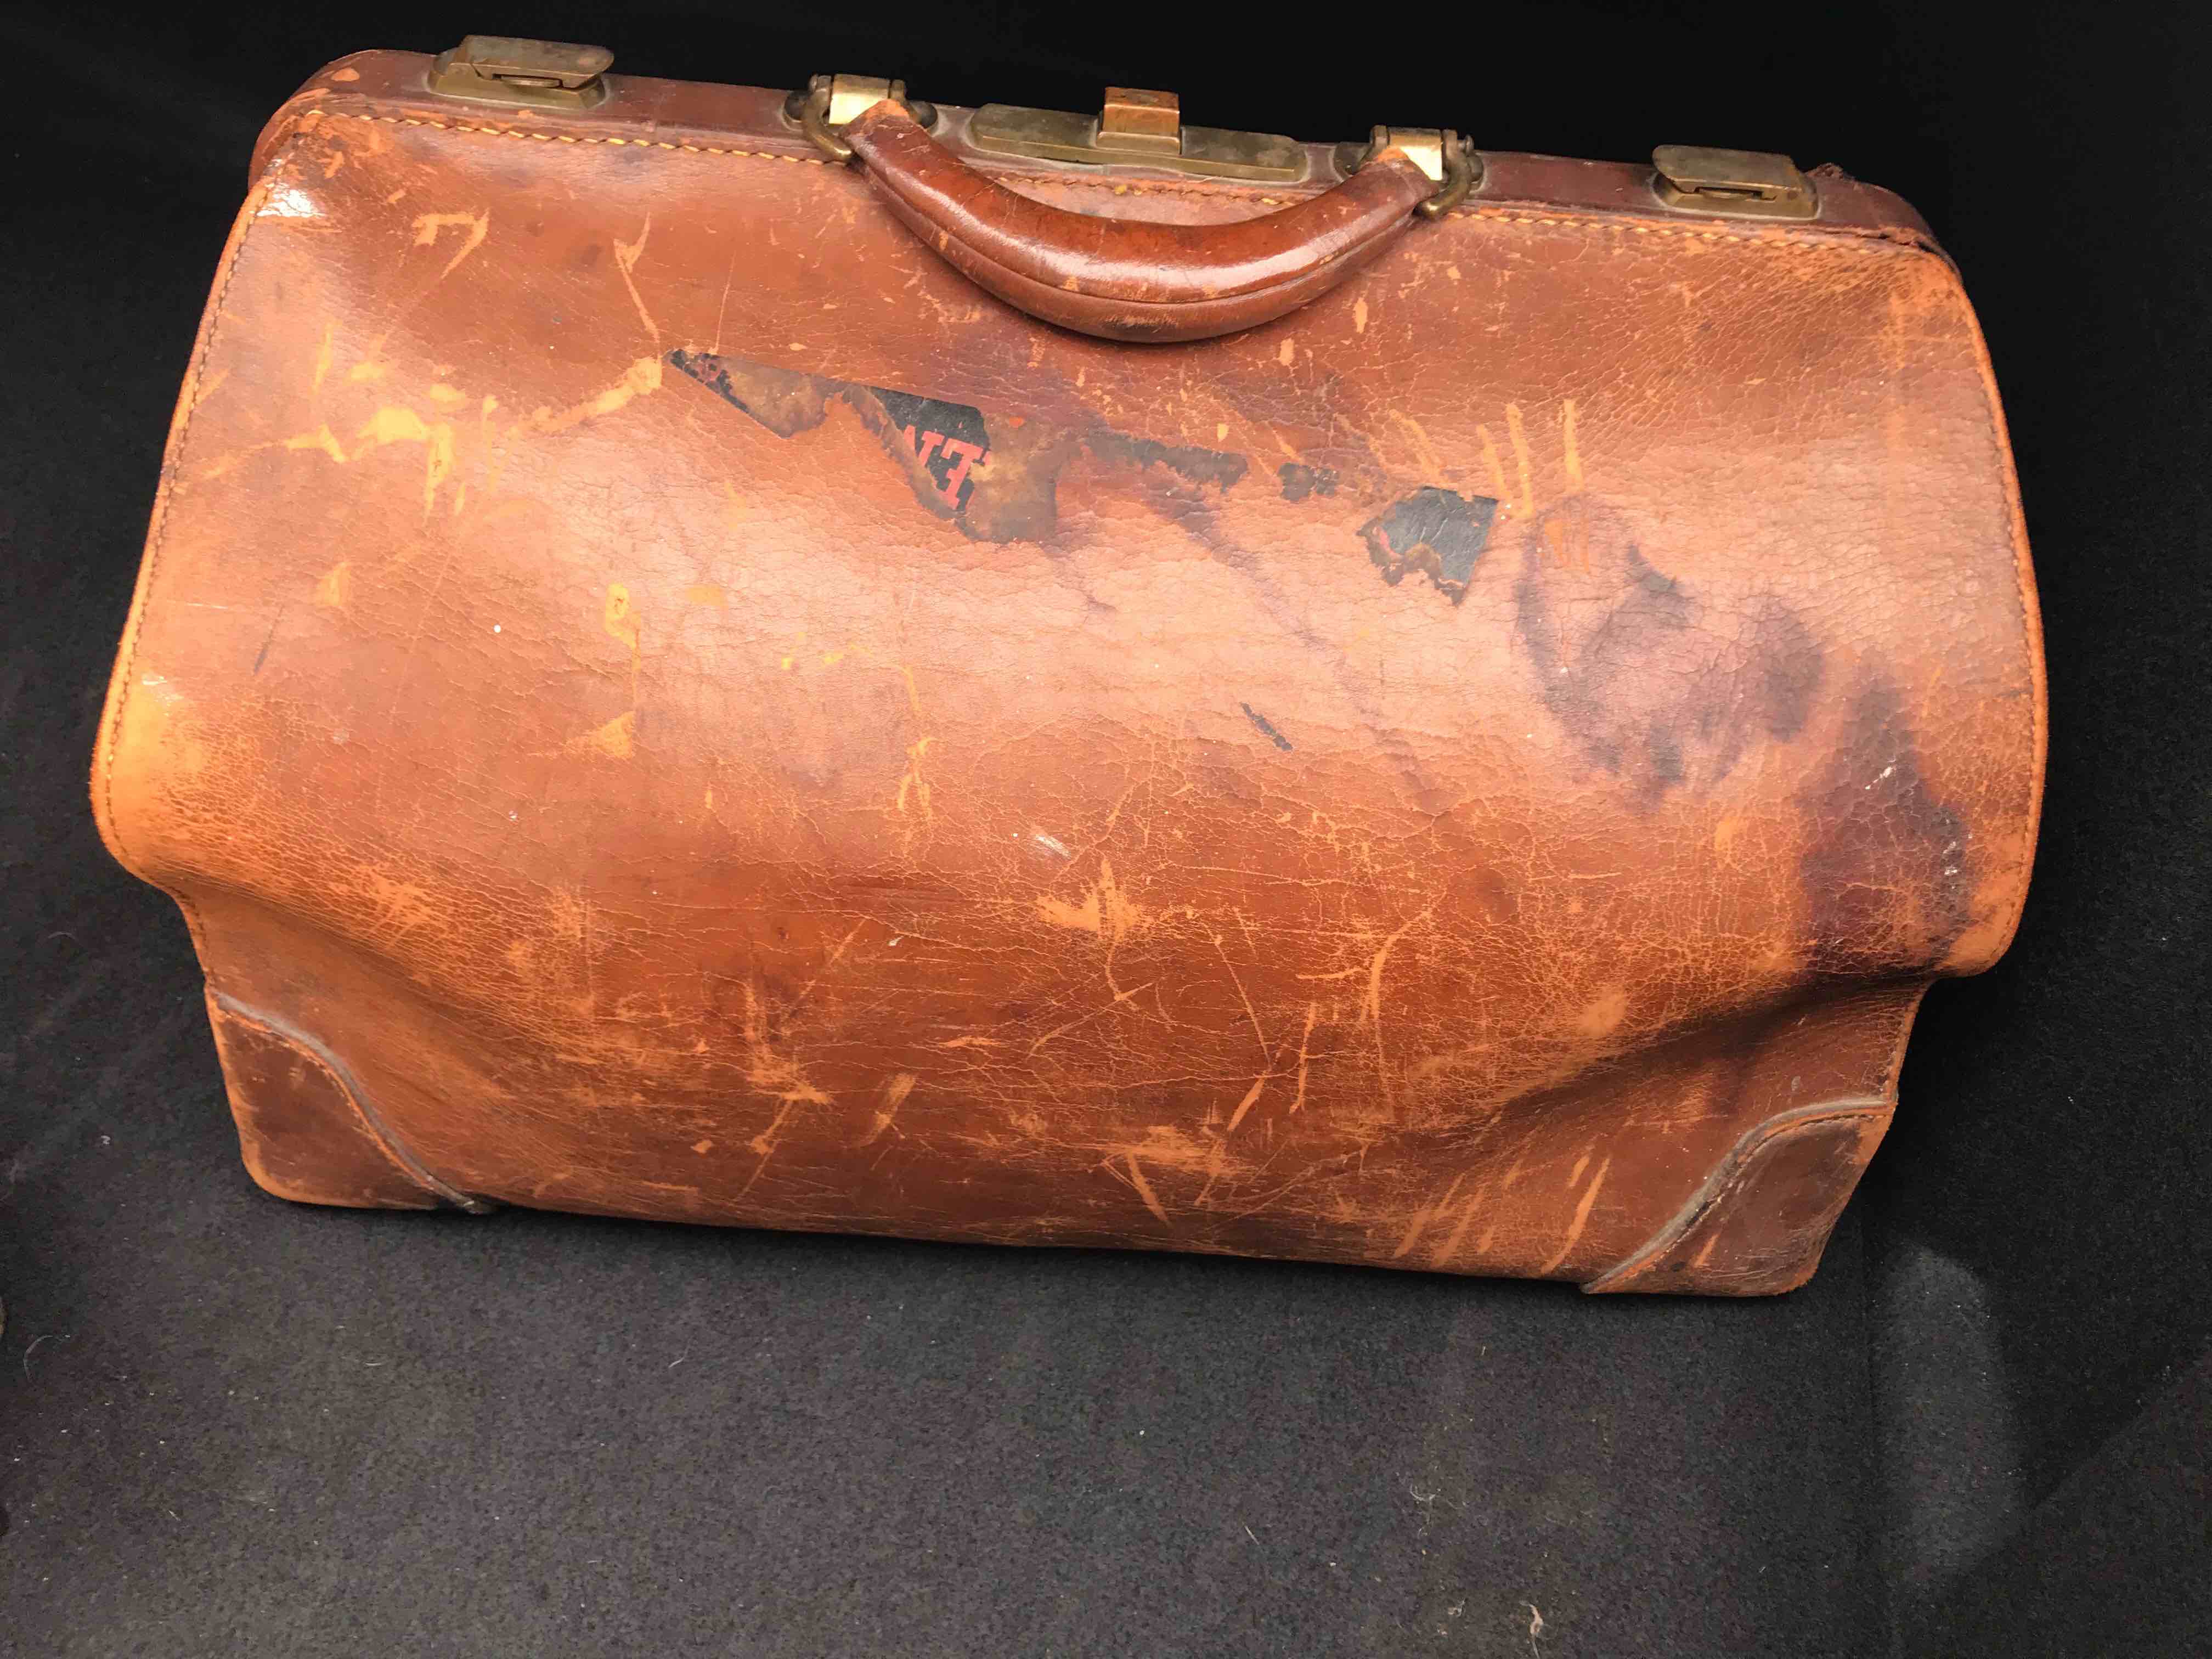 Leather Bag Repairs and Restoration at Devon Leather Care